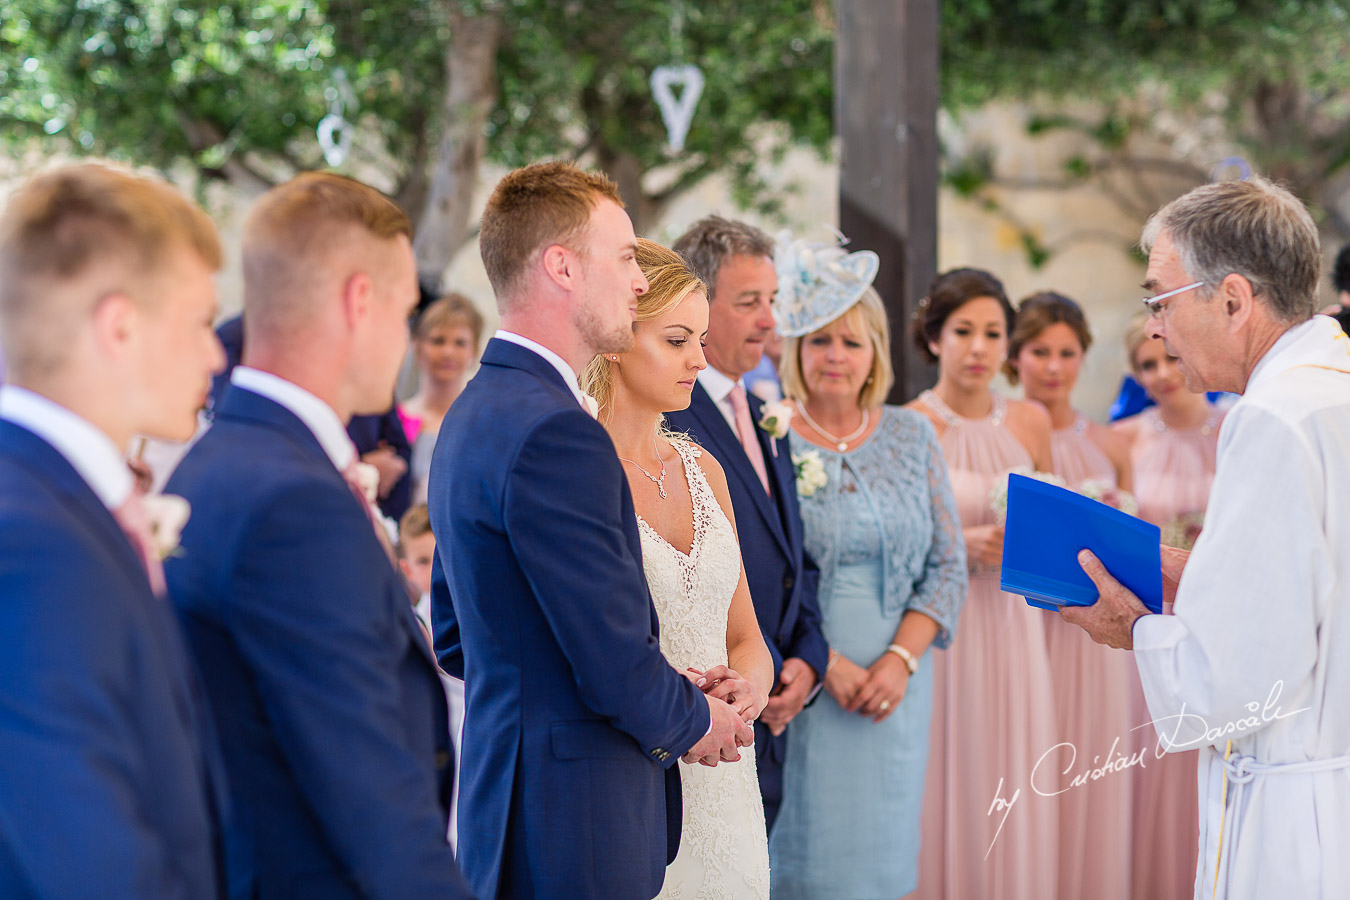 Beautiful wedding ceremony moments at Aphrodite Hills Resort in Cyprus, captured by photographer Cristian Dascalu.